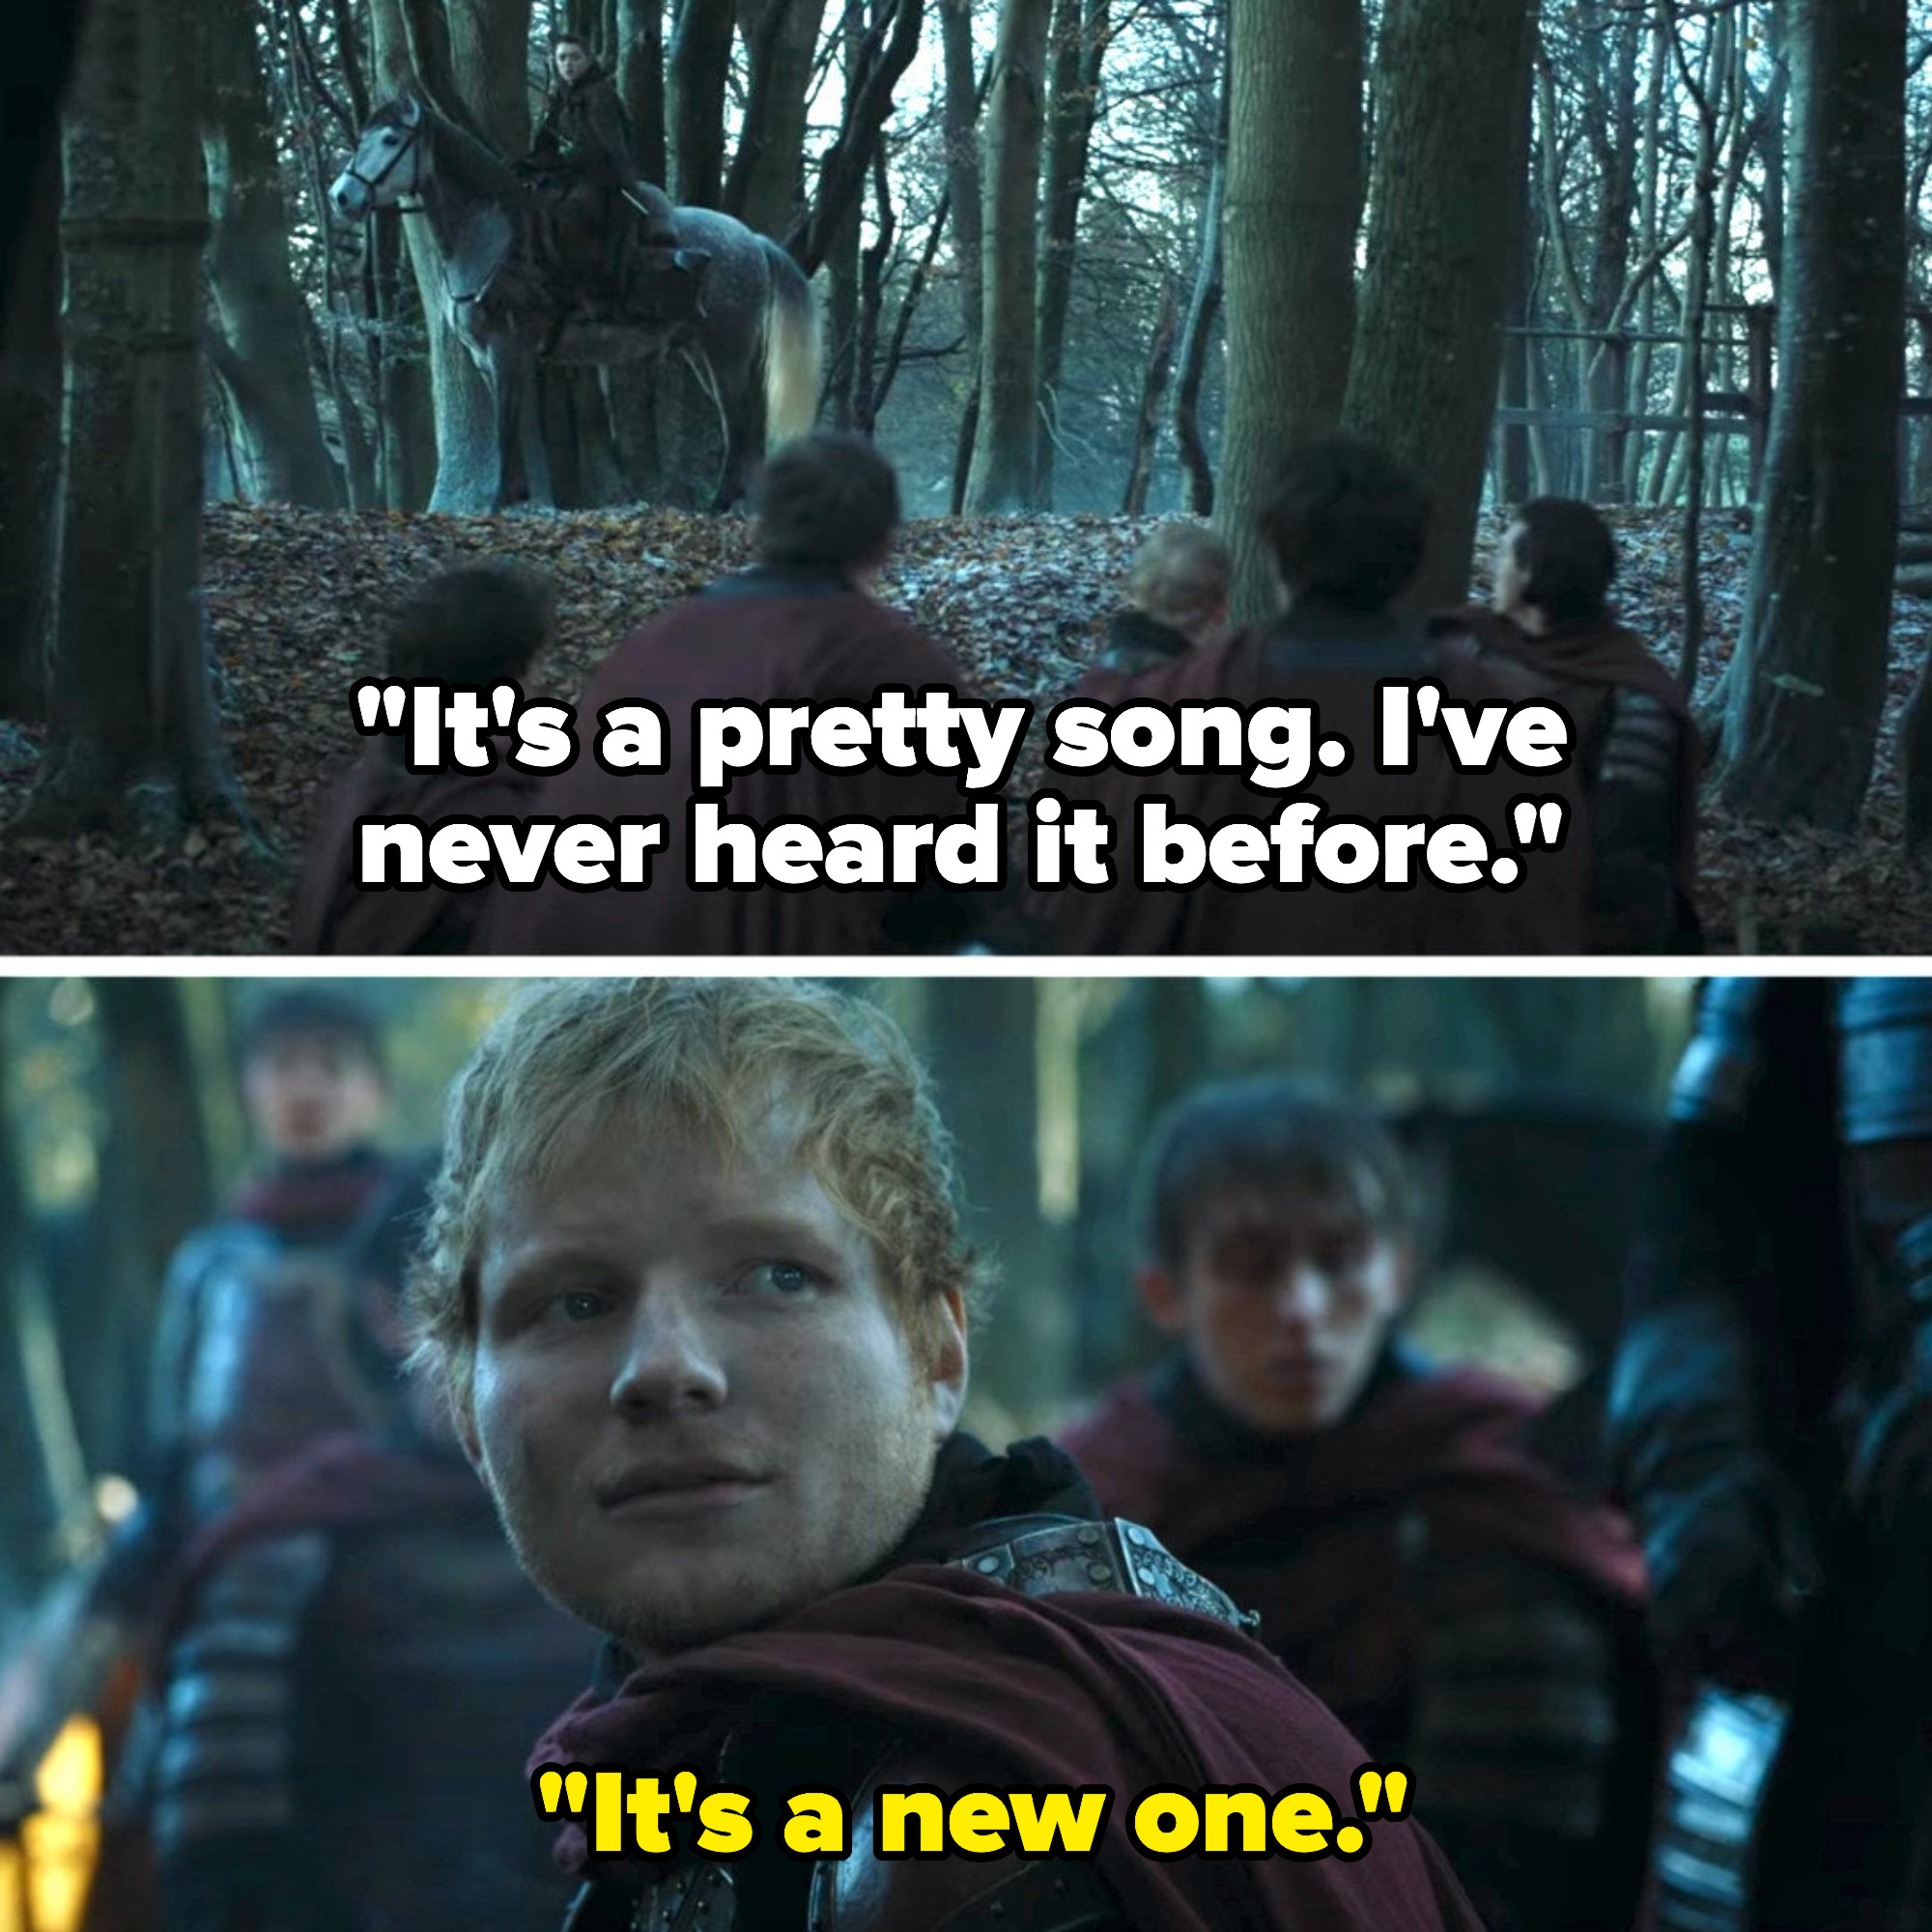 Arya says &quot;It&#x27;s a pretty song, I&#x27;ve never heard it before,&quot; Ed Sheeran replies &quot;It&#x27;s a new one&quot;